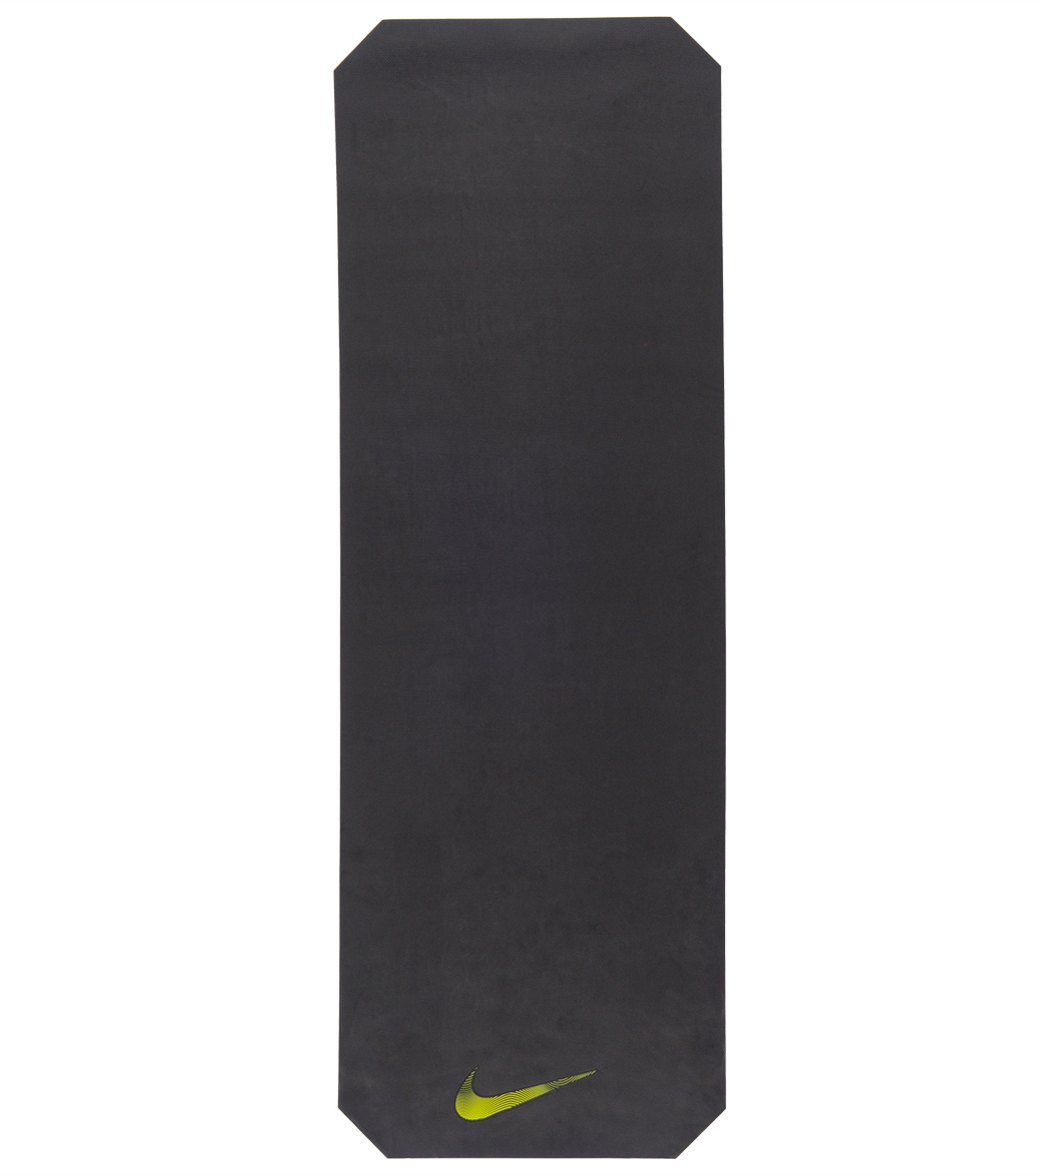 Nike Training Mat 2.0 at SwimOutlet.com - Free Shipping